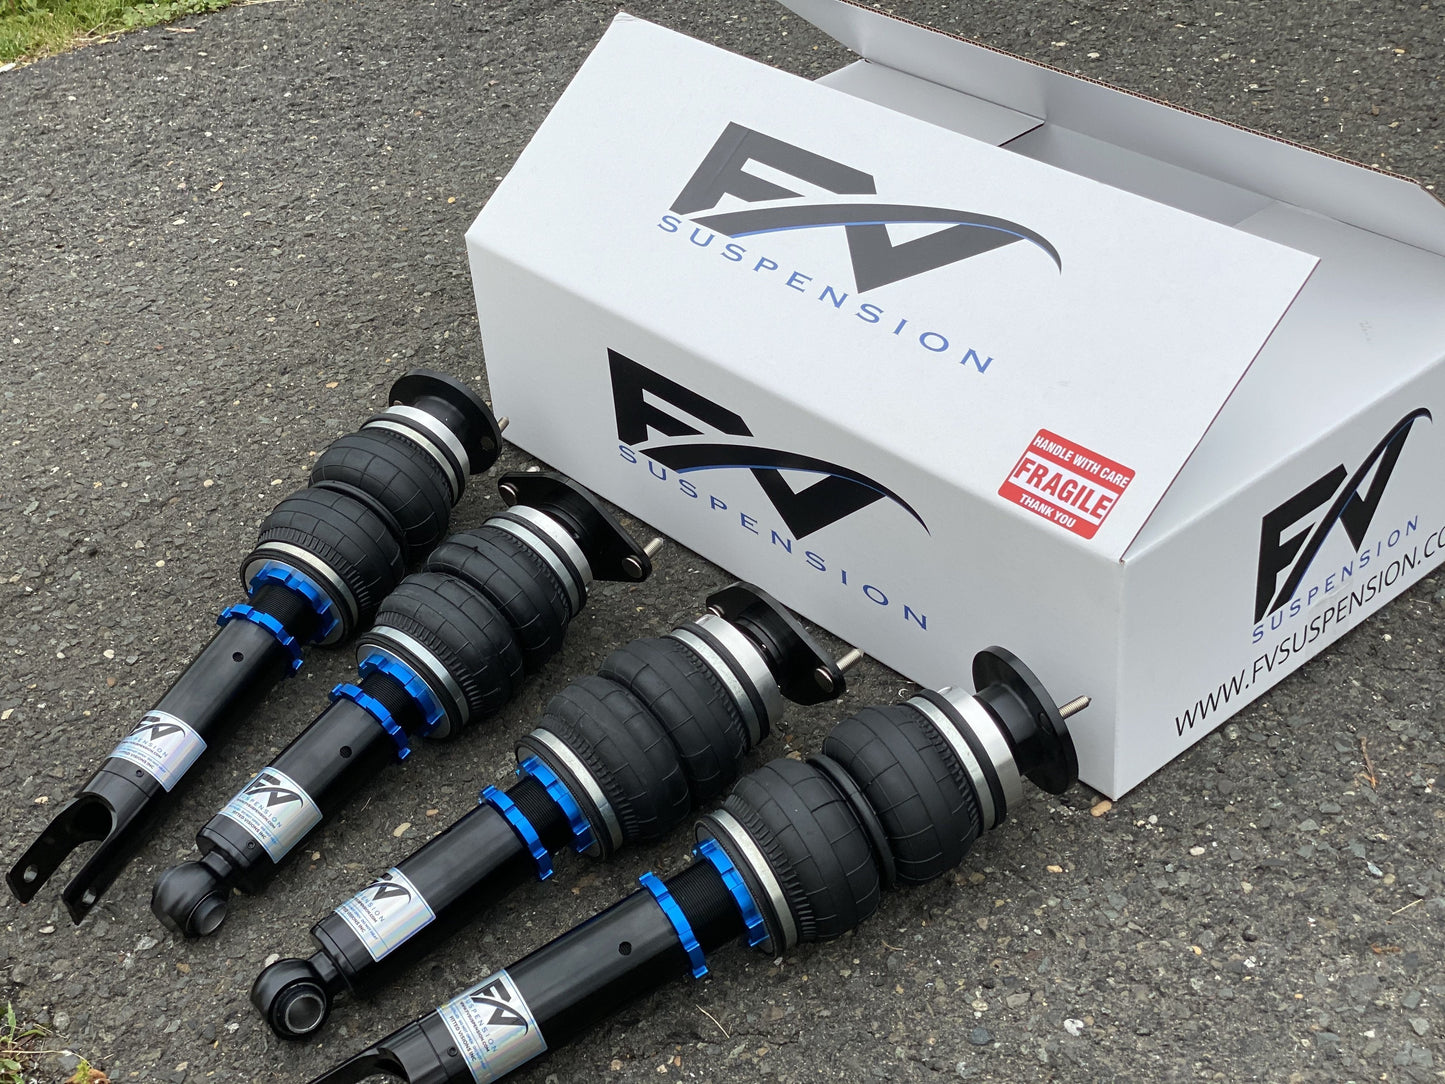 FV Suspension Tier 1 Budget kit Complete Air Ride kit for 82-90 Mitsubishi Starion/Chrysler/Conquest - Full Kit